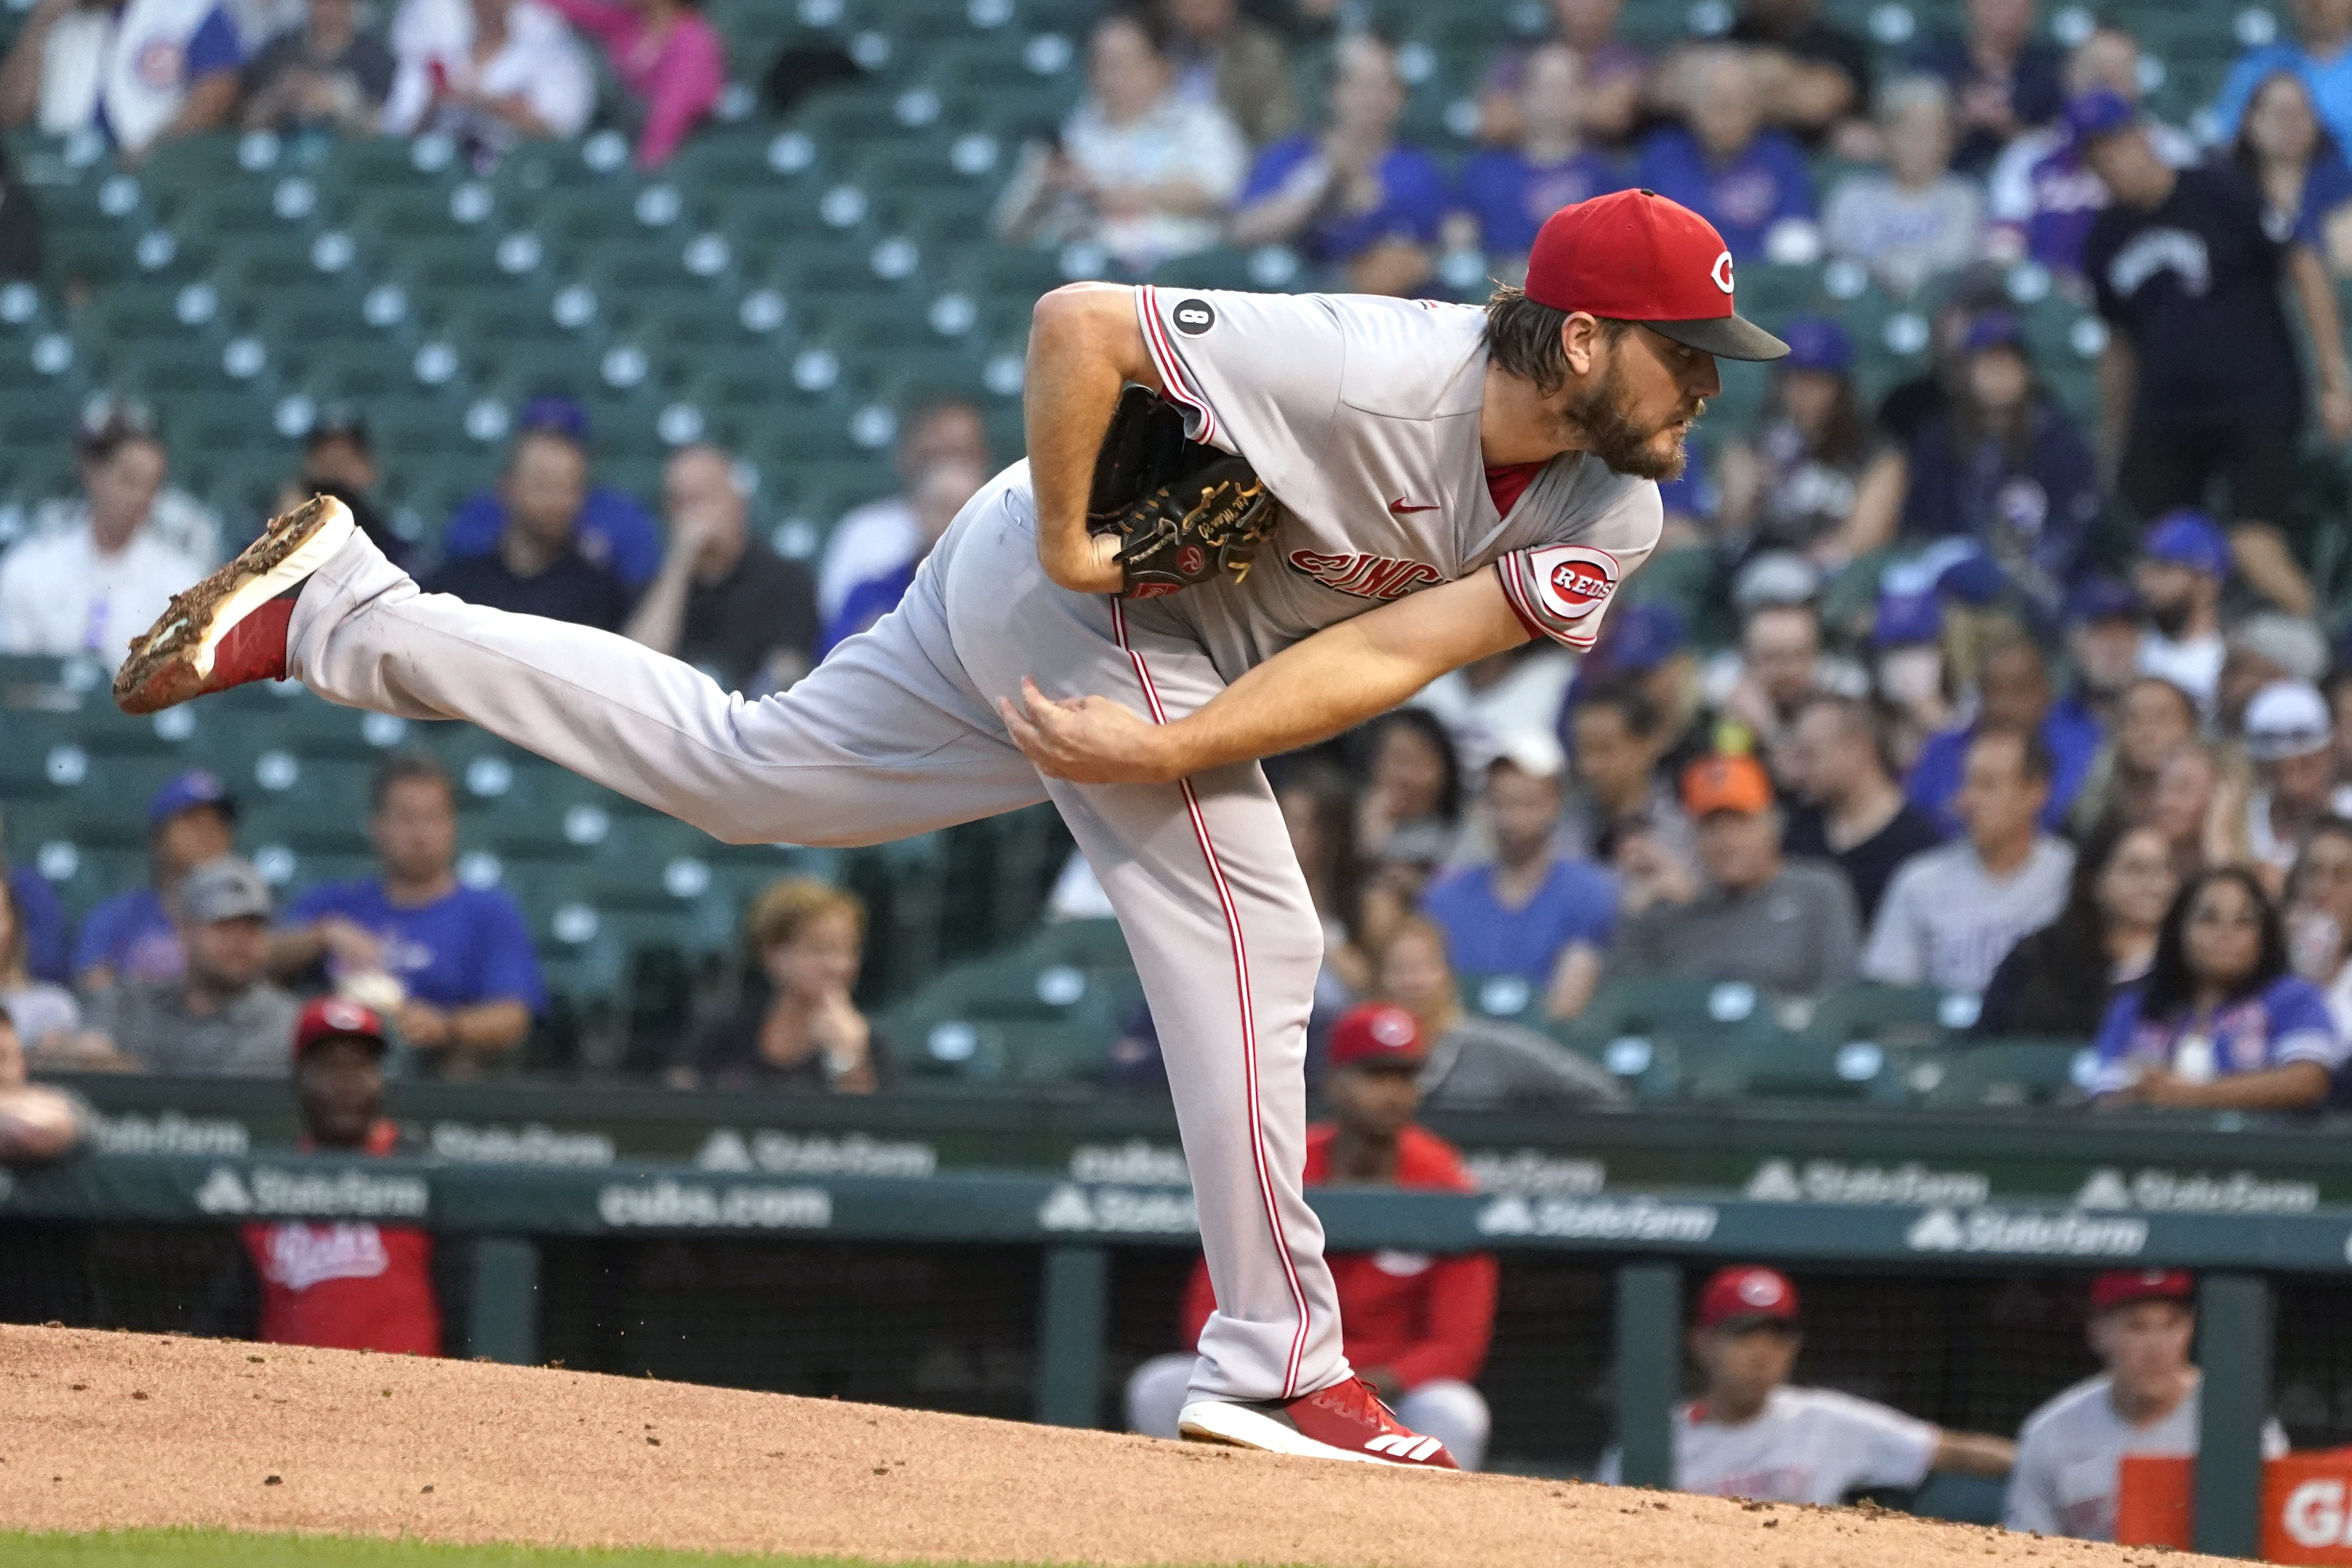 Cincinnati Reds starting pitcher Wade Miley watches a throw during the first inning of the team’s baseball game against the Chicago Cubs on Tuesday, Sept. 7, 2021, in Chicago. (AP Photo/Charles Rex Arbogast) ORG XMIT: CXC101